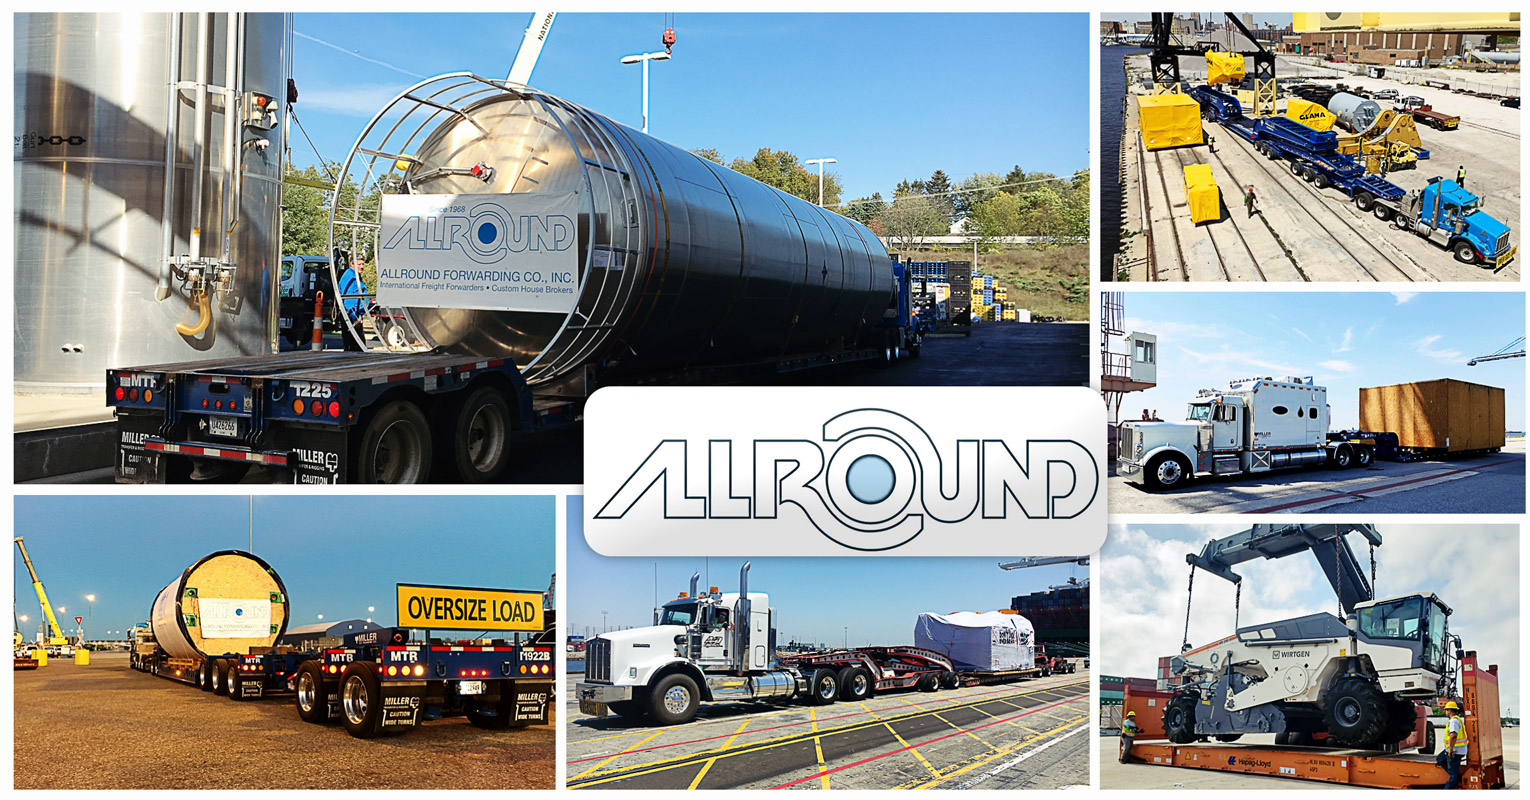 New member representing United States (Midwest) – Allround Forwarding Midwest Inc